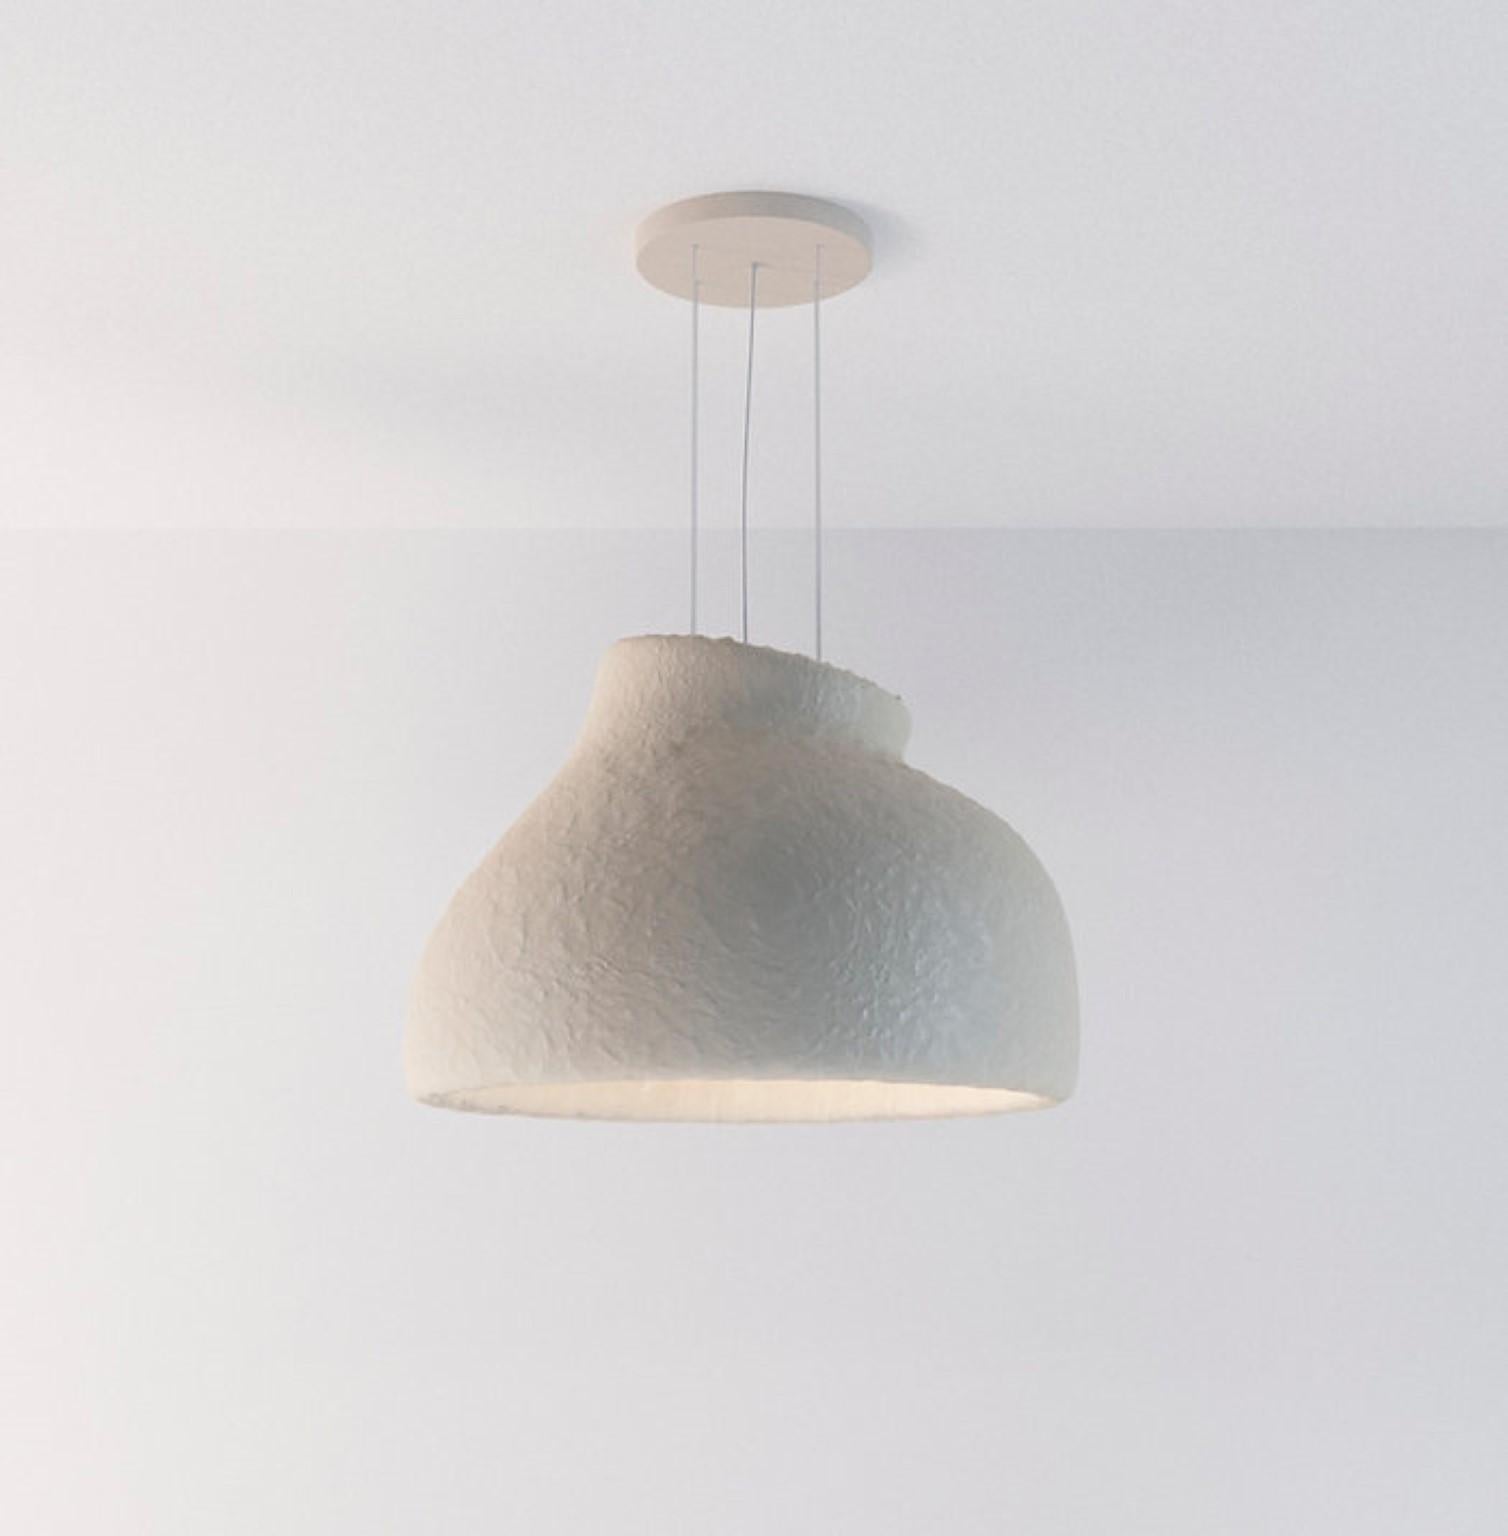 Small pendant lamp by Faina
Design: Victoriya Yakusha
Materials: A blend of upcycled steel, flax frubber, wood chips, cellulose, and Clay all with Biopolymer cover
Dimensions: D 60 x H 43 cm
Available in 12 colours.

SONIAH tends toward the